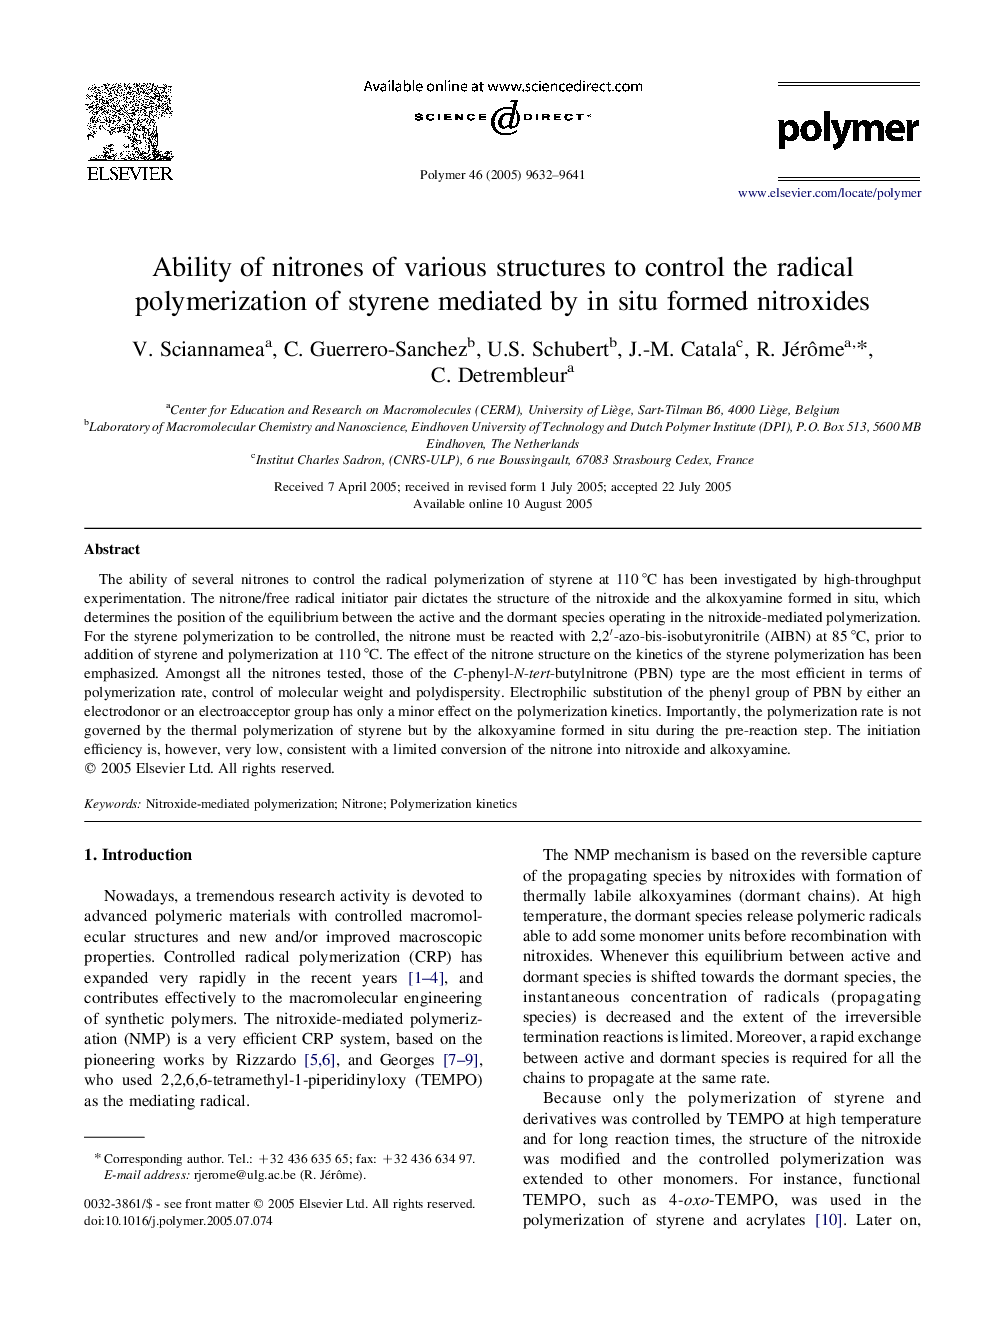 Ability of nitrones of various structures to control the radical polymerization of styrene mediated by in situ formed nitroxides